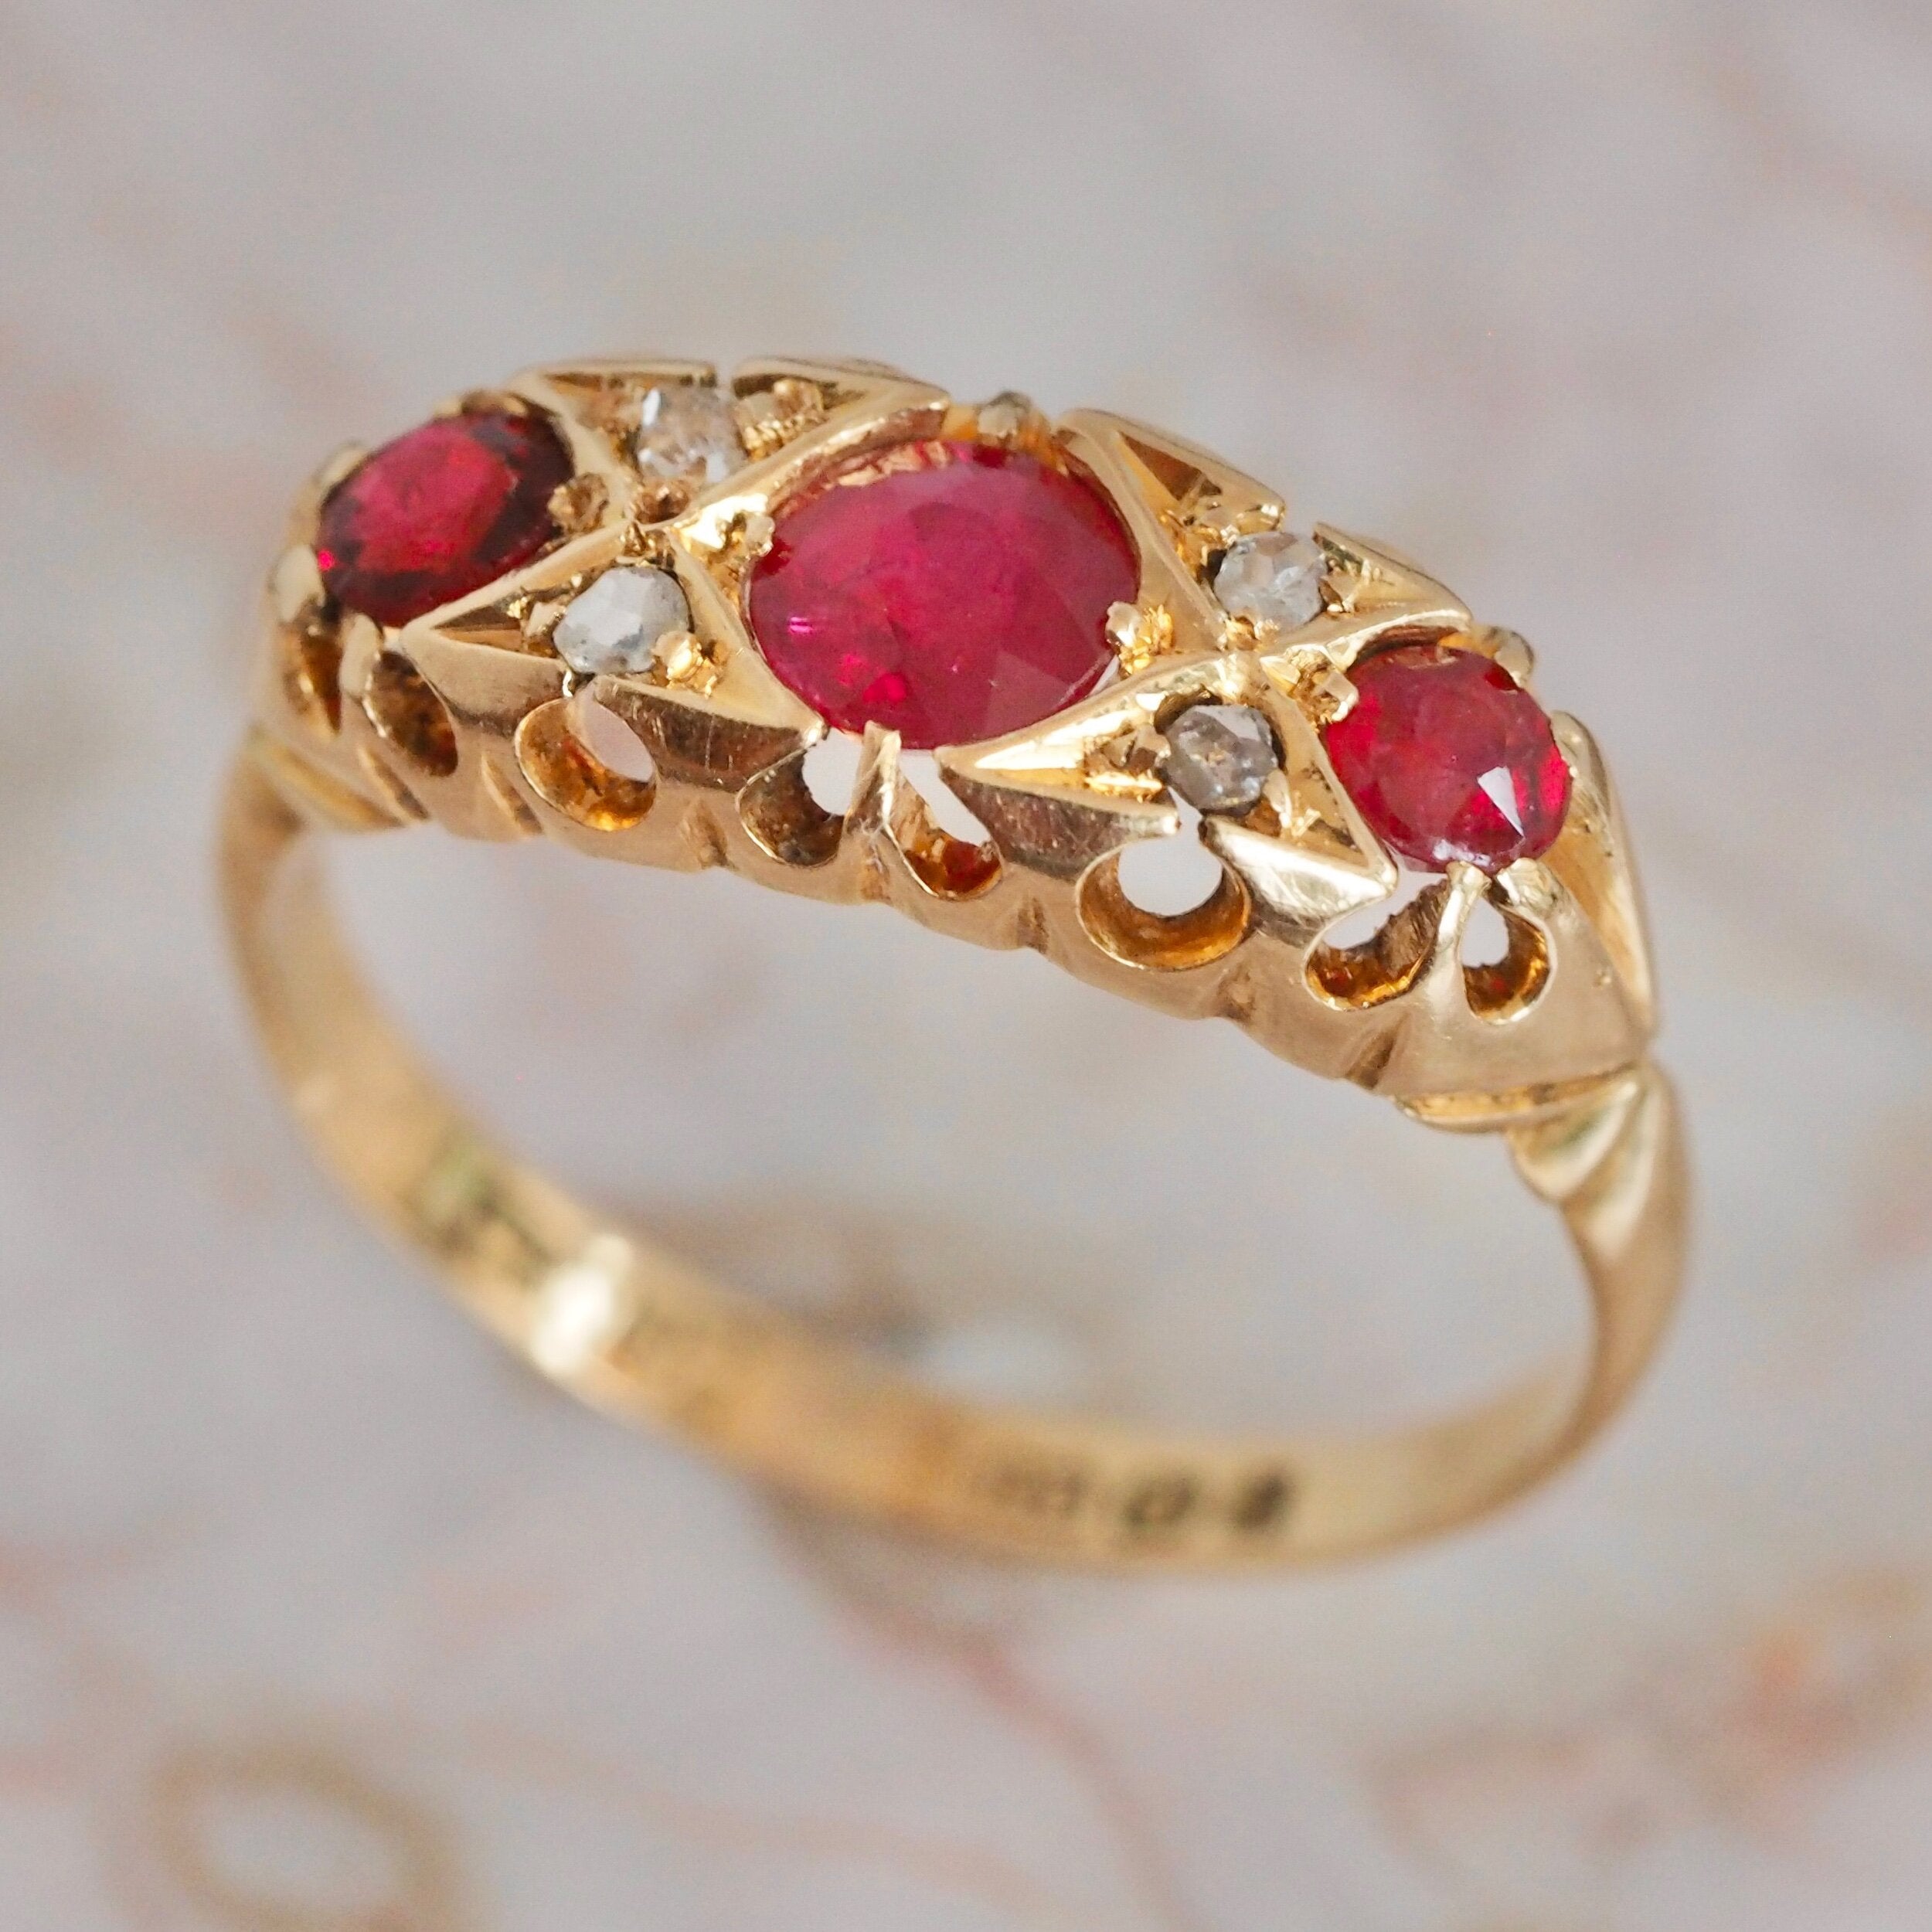 Antique English 18k Gold Ruby and Diamond Ring